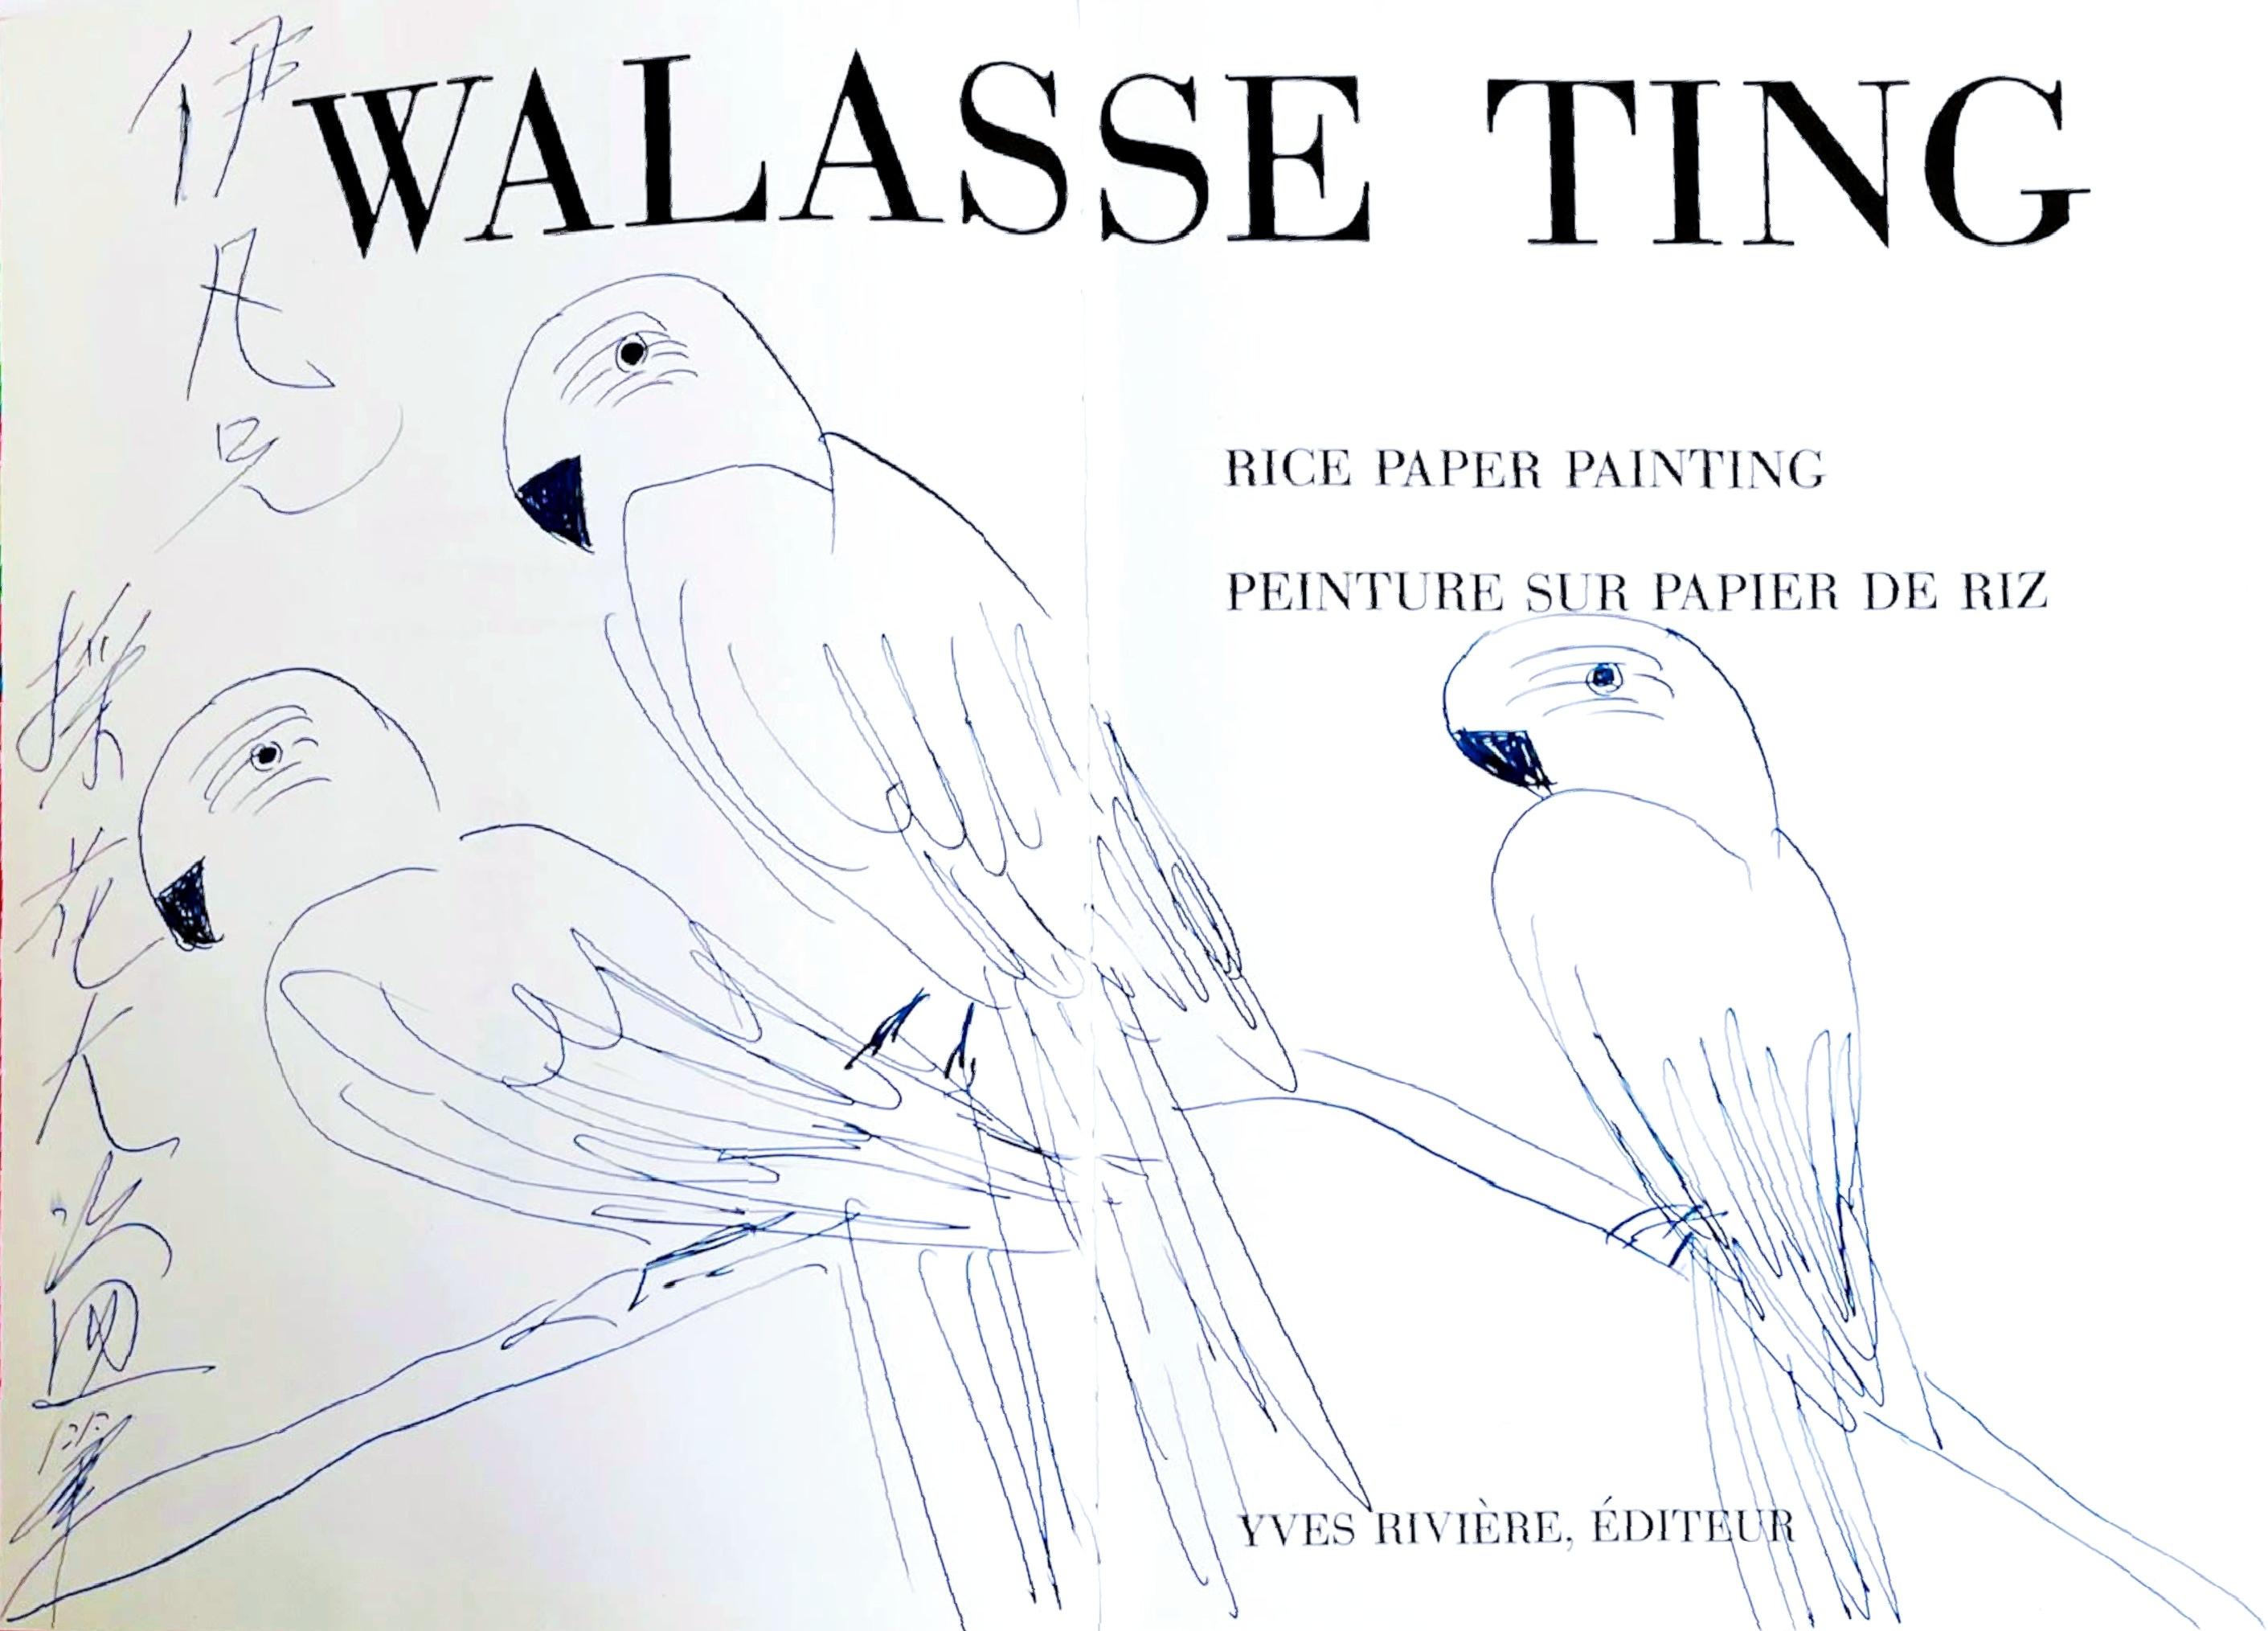 Walasse Ting Animal Art - Original unique drawing of three parrots in monograph by renowned Chinese artist